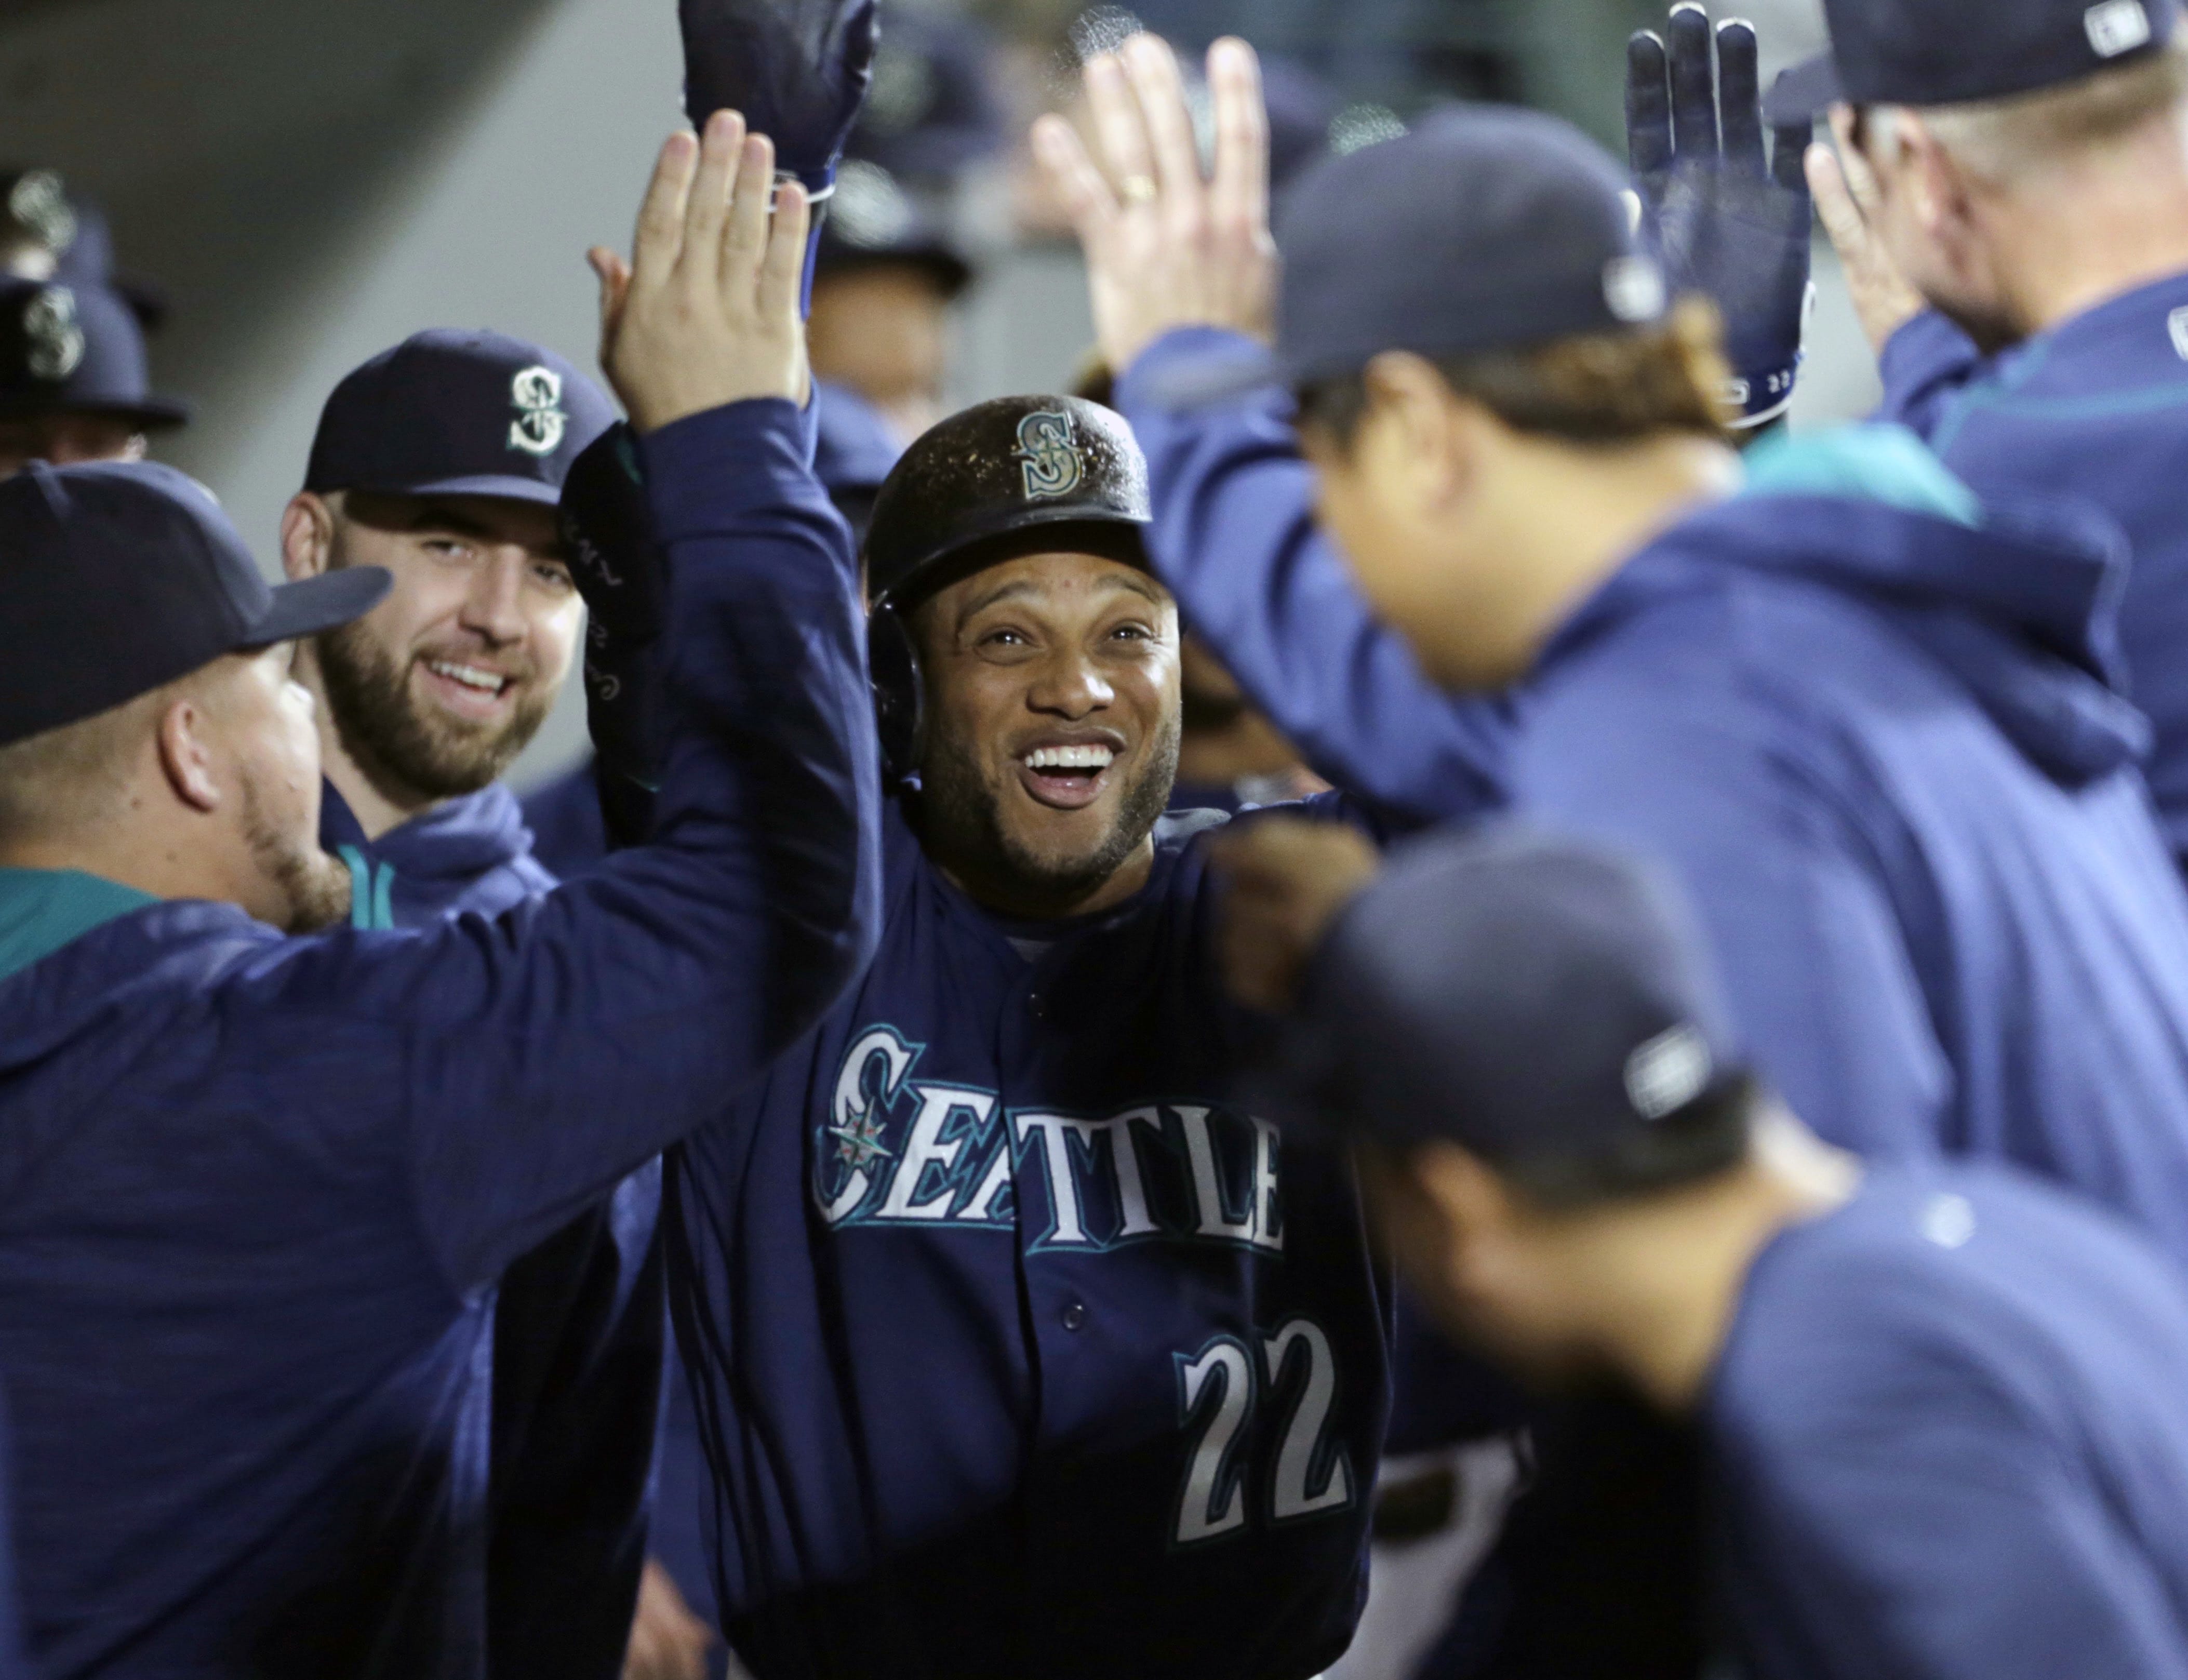 Seattle Mariners' Robinson Cano is congratulated in the dugout after hitting a solo home run on a pitch from Oakland Athletics starter Raul Alcantara during the third inning of a baseball game on Friday, Sept. 30, 2016, in Seattle.